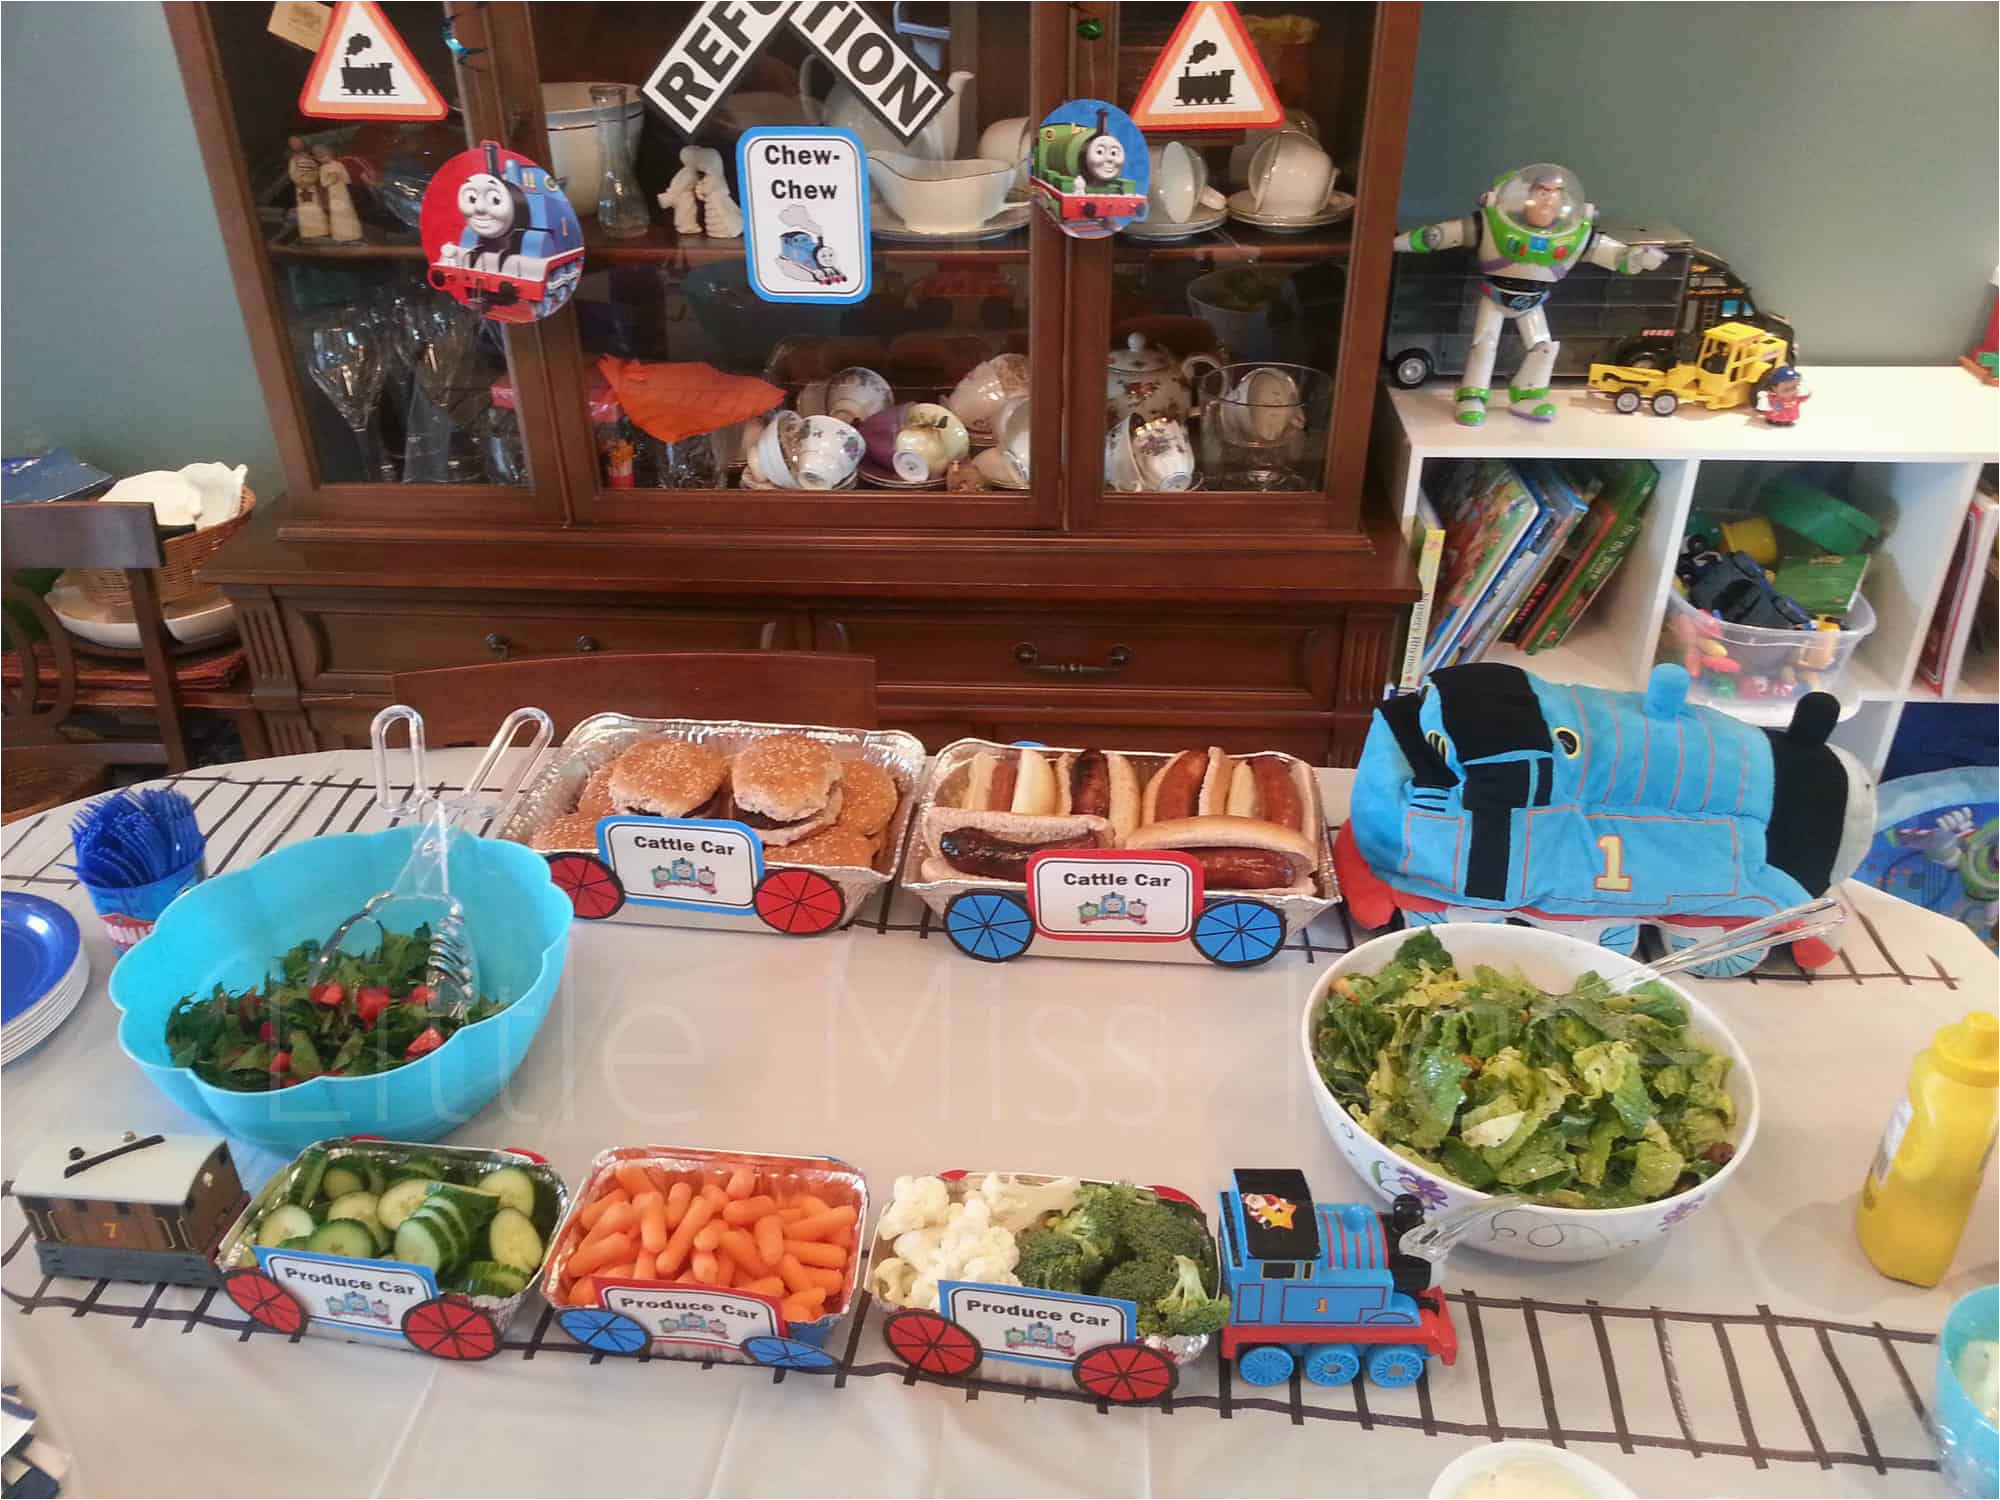 Train Decorations for Birthday Party Kids Birthday Party Ideas Thomas the Train Party Ideas